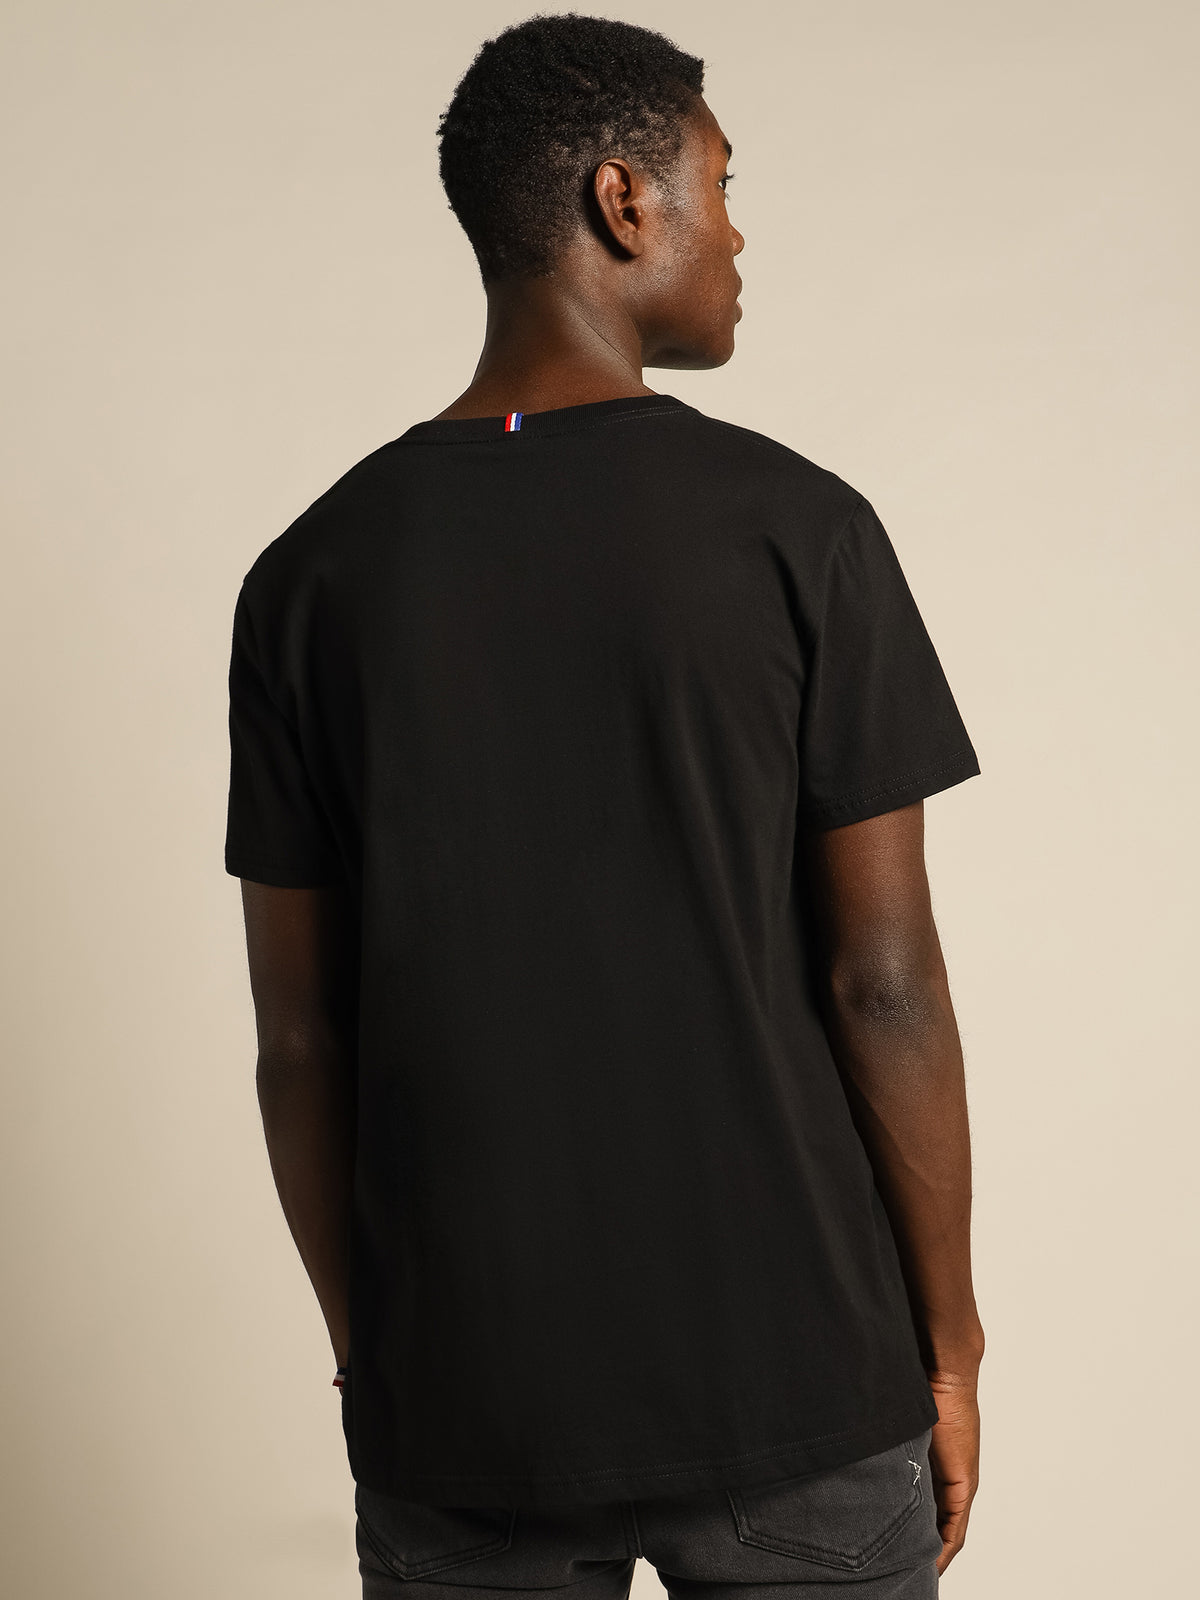 Victor T-Shirt in Black